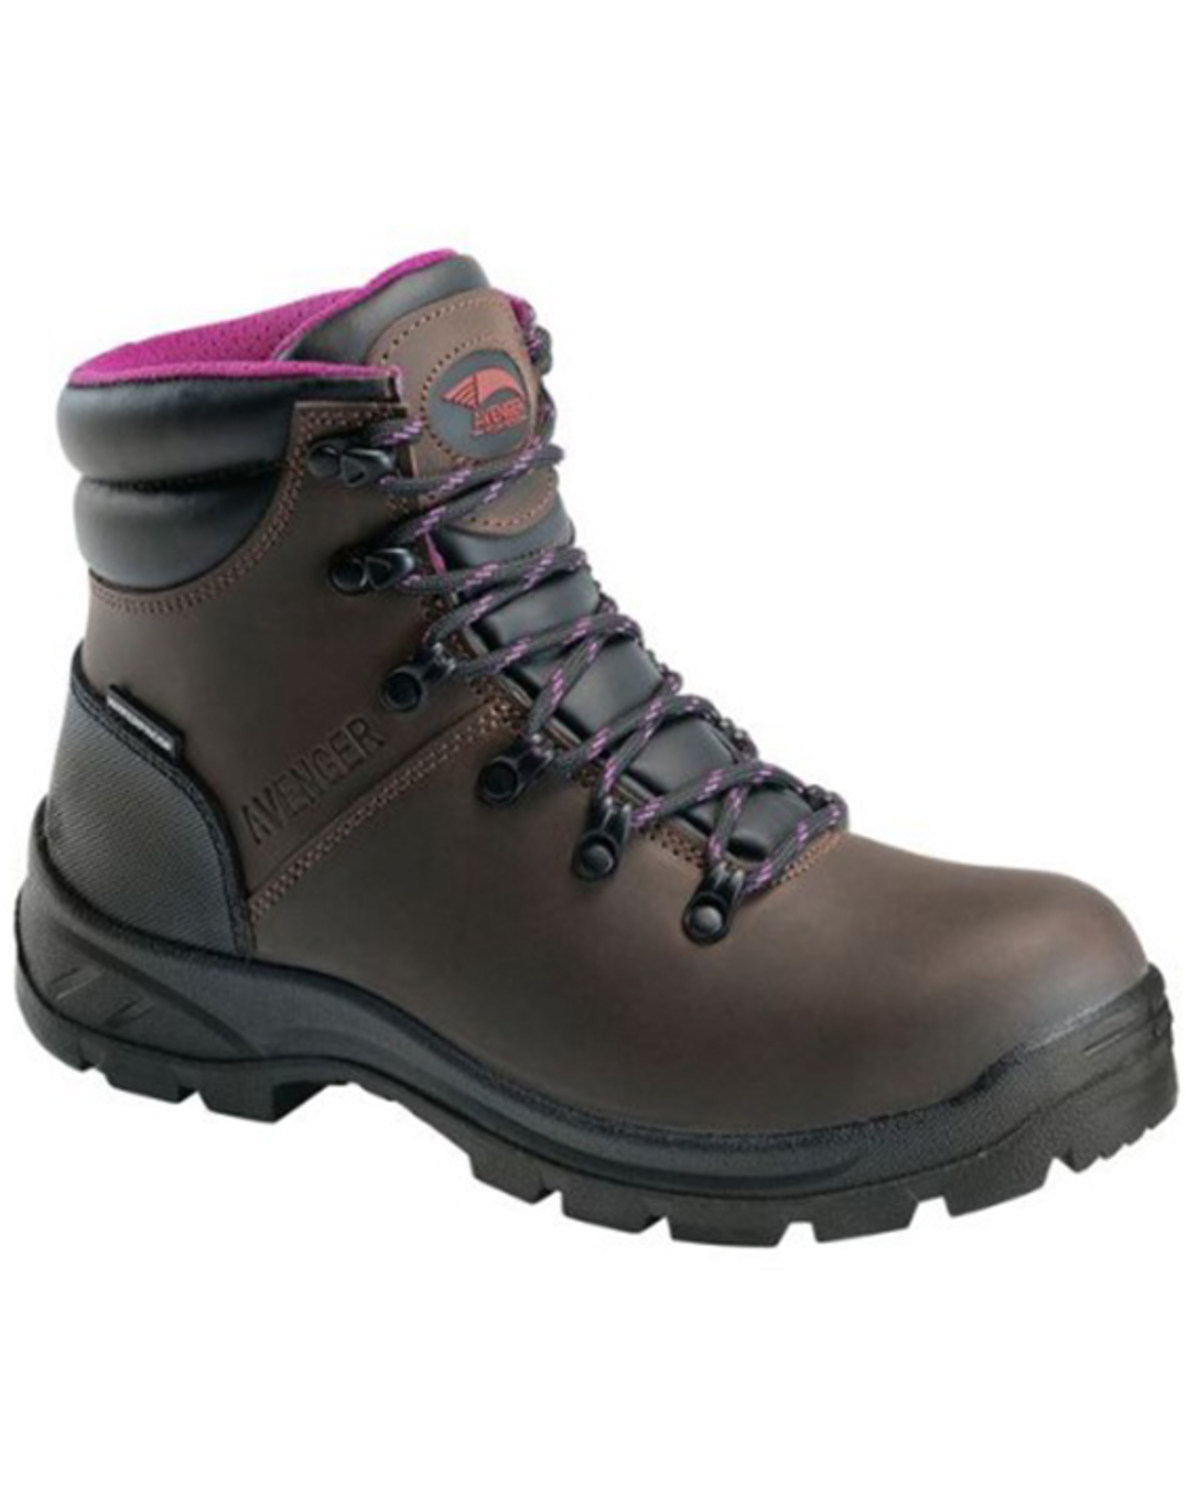 Avenger Women's Builder Mid Waterproof Lace-Up Work Boots - Soft Toe